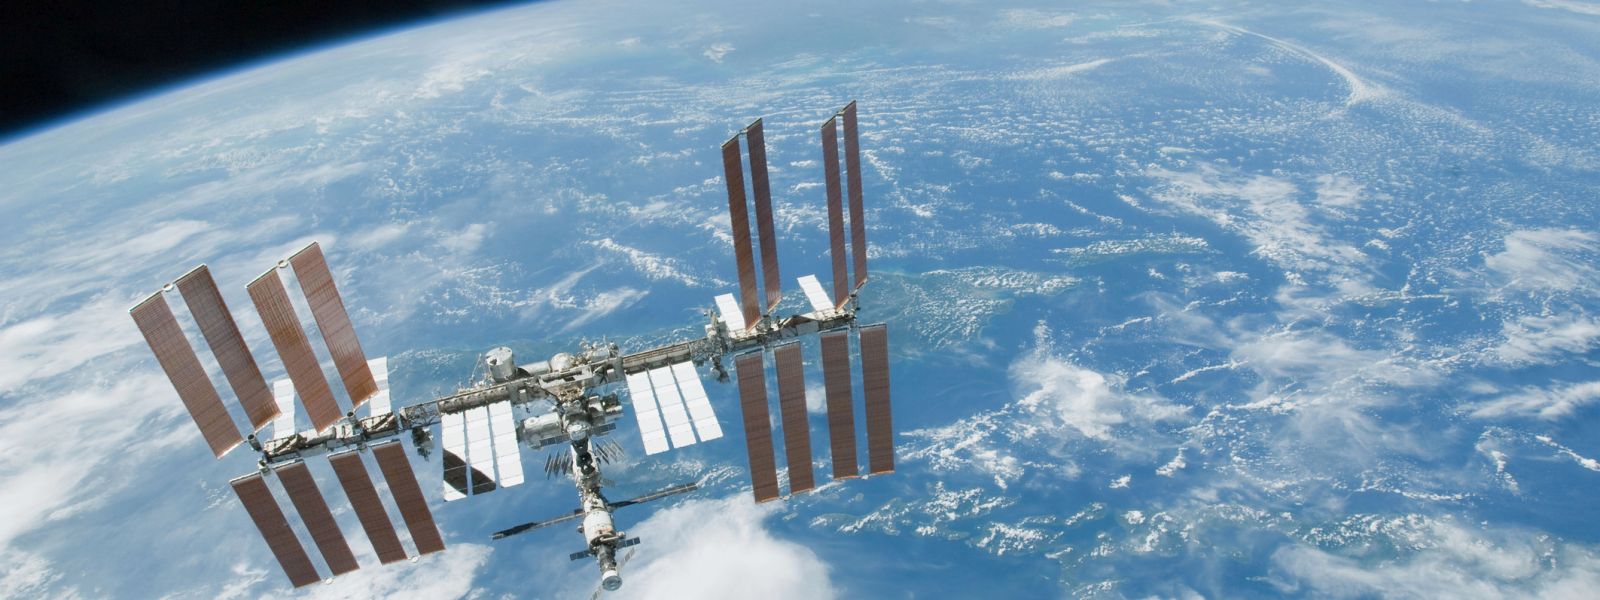 International Space Station in orbit around the Earth